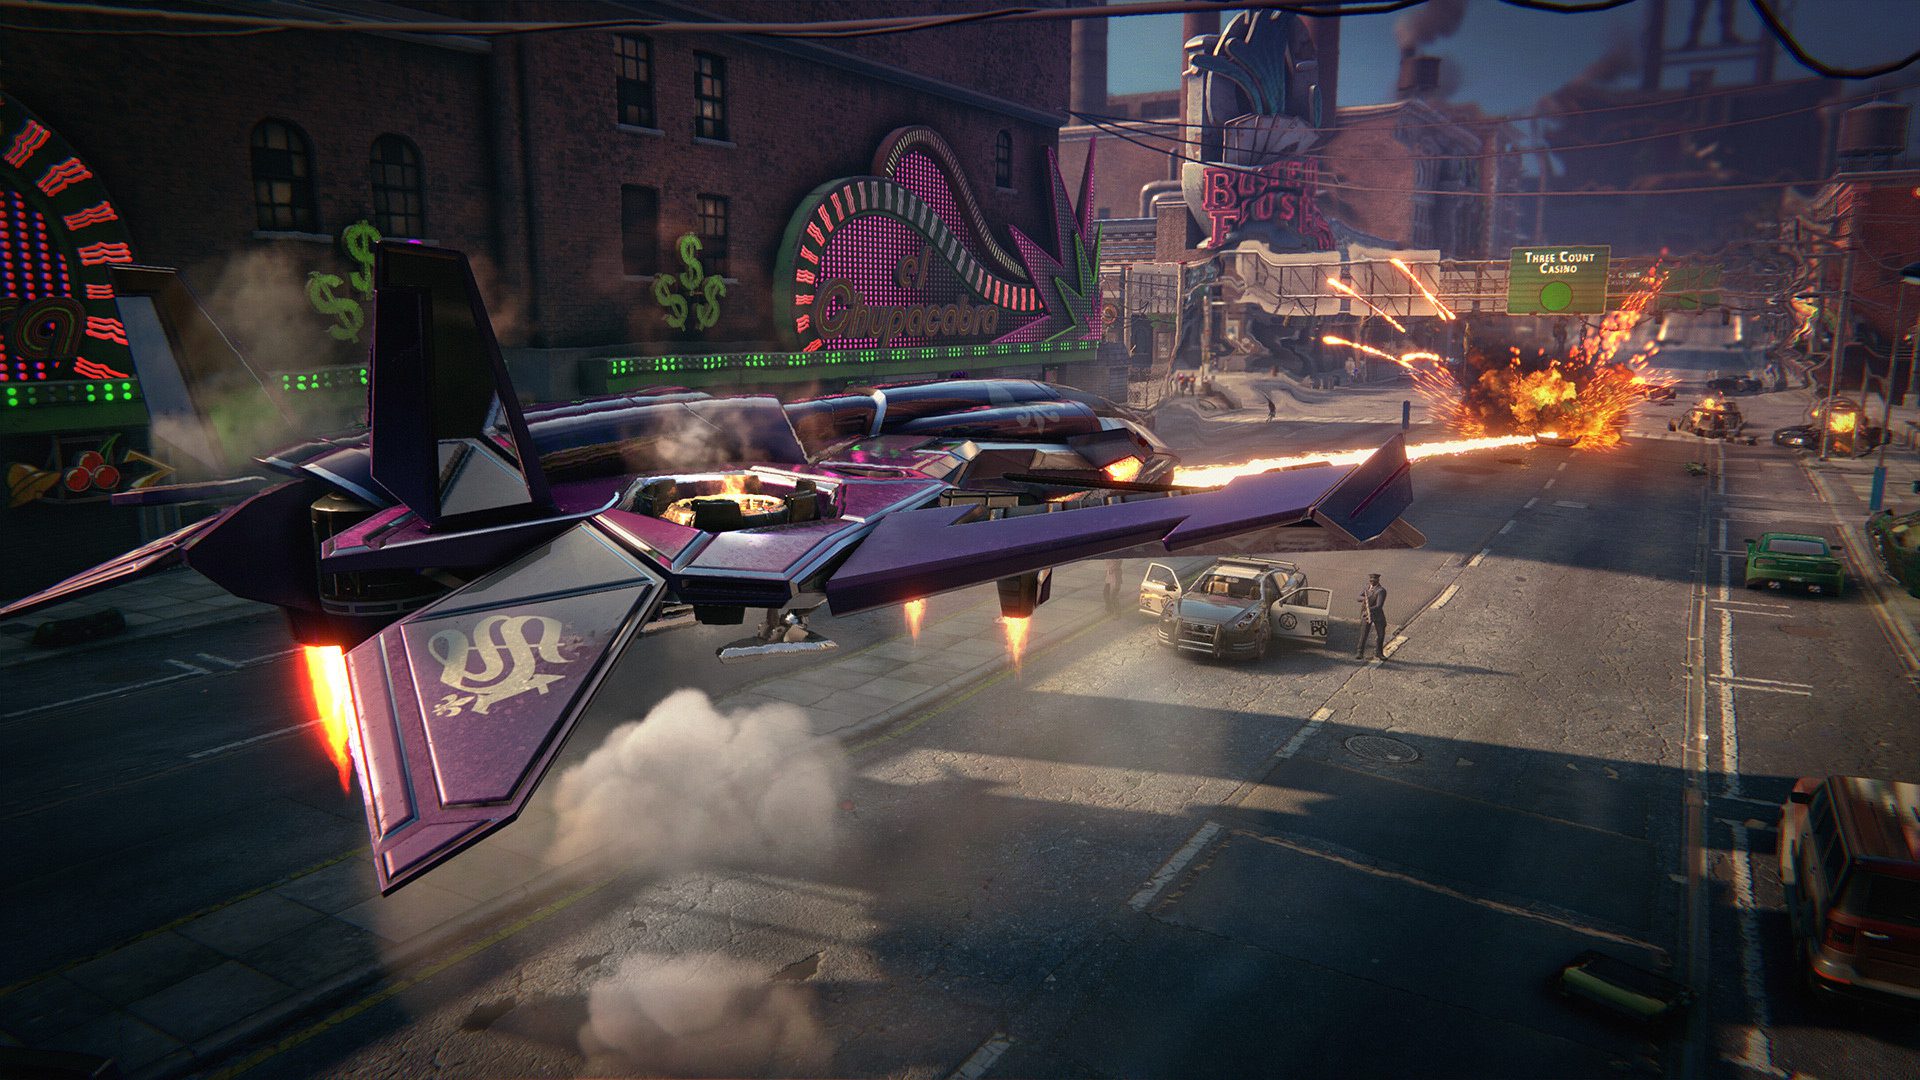 Blowing up a car with the F-69 VTOL in Saints Row: The Third Remastered